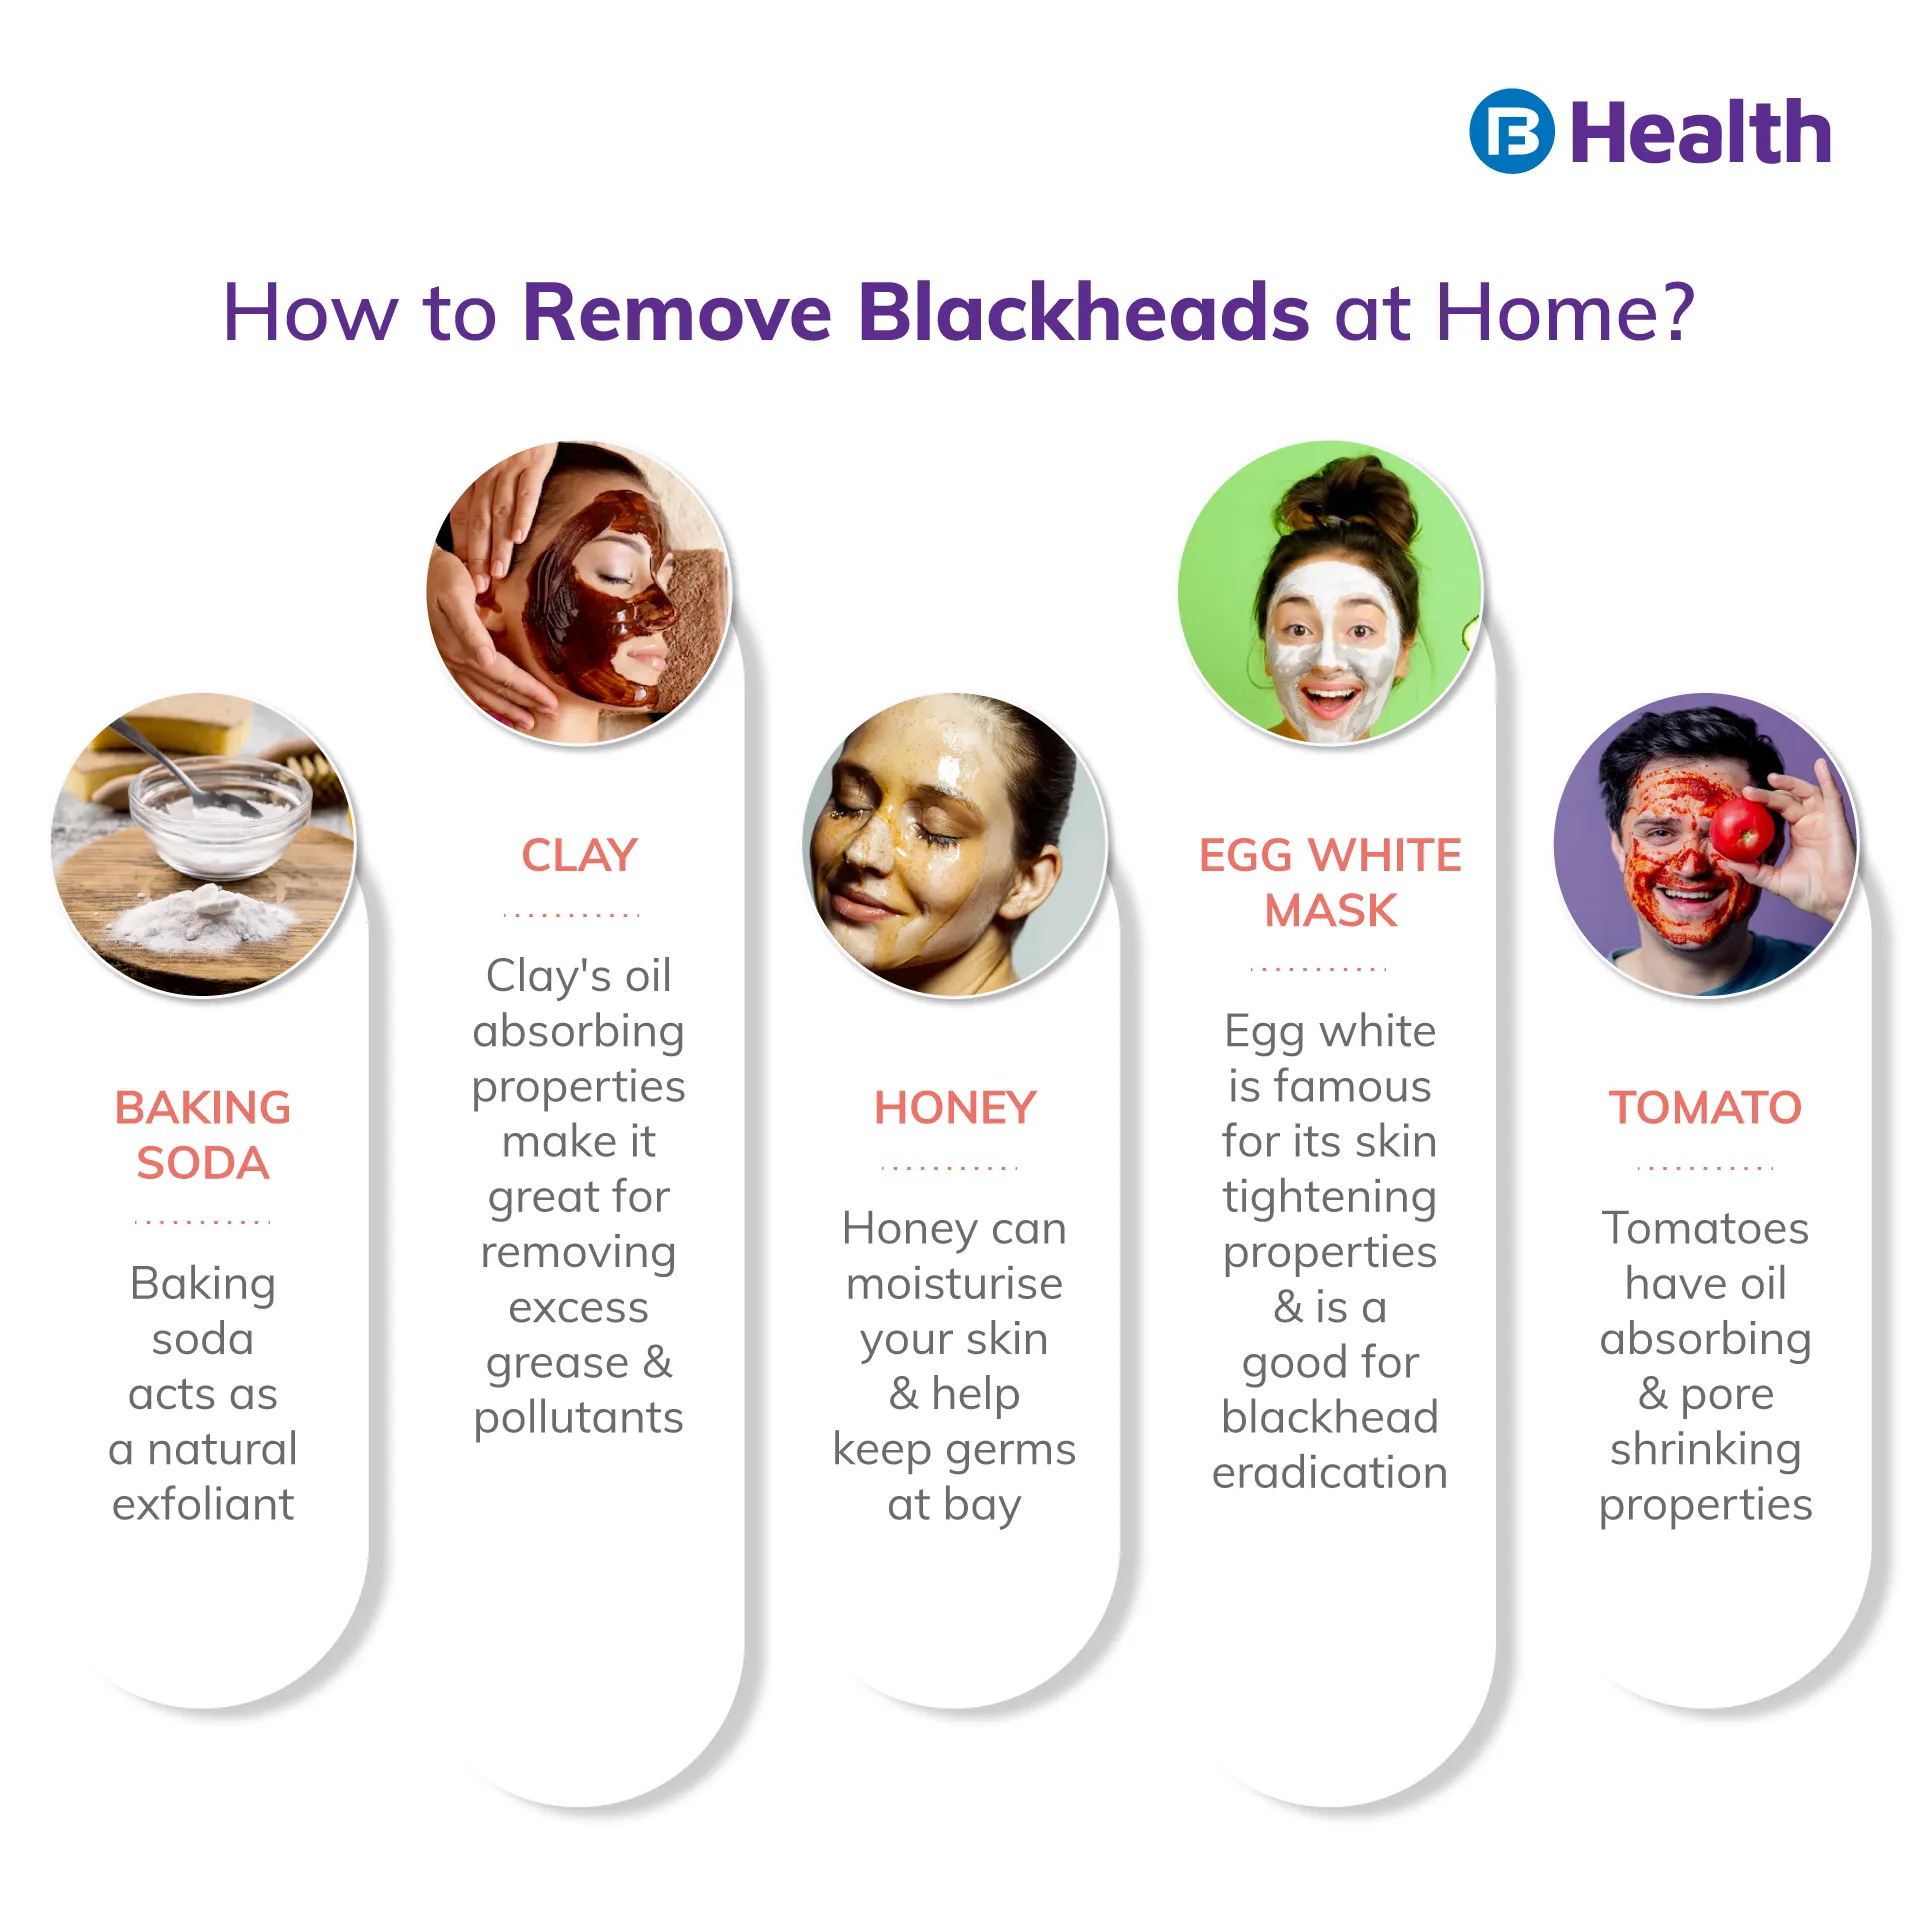 how to Remove Blackheads at home 